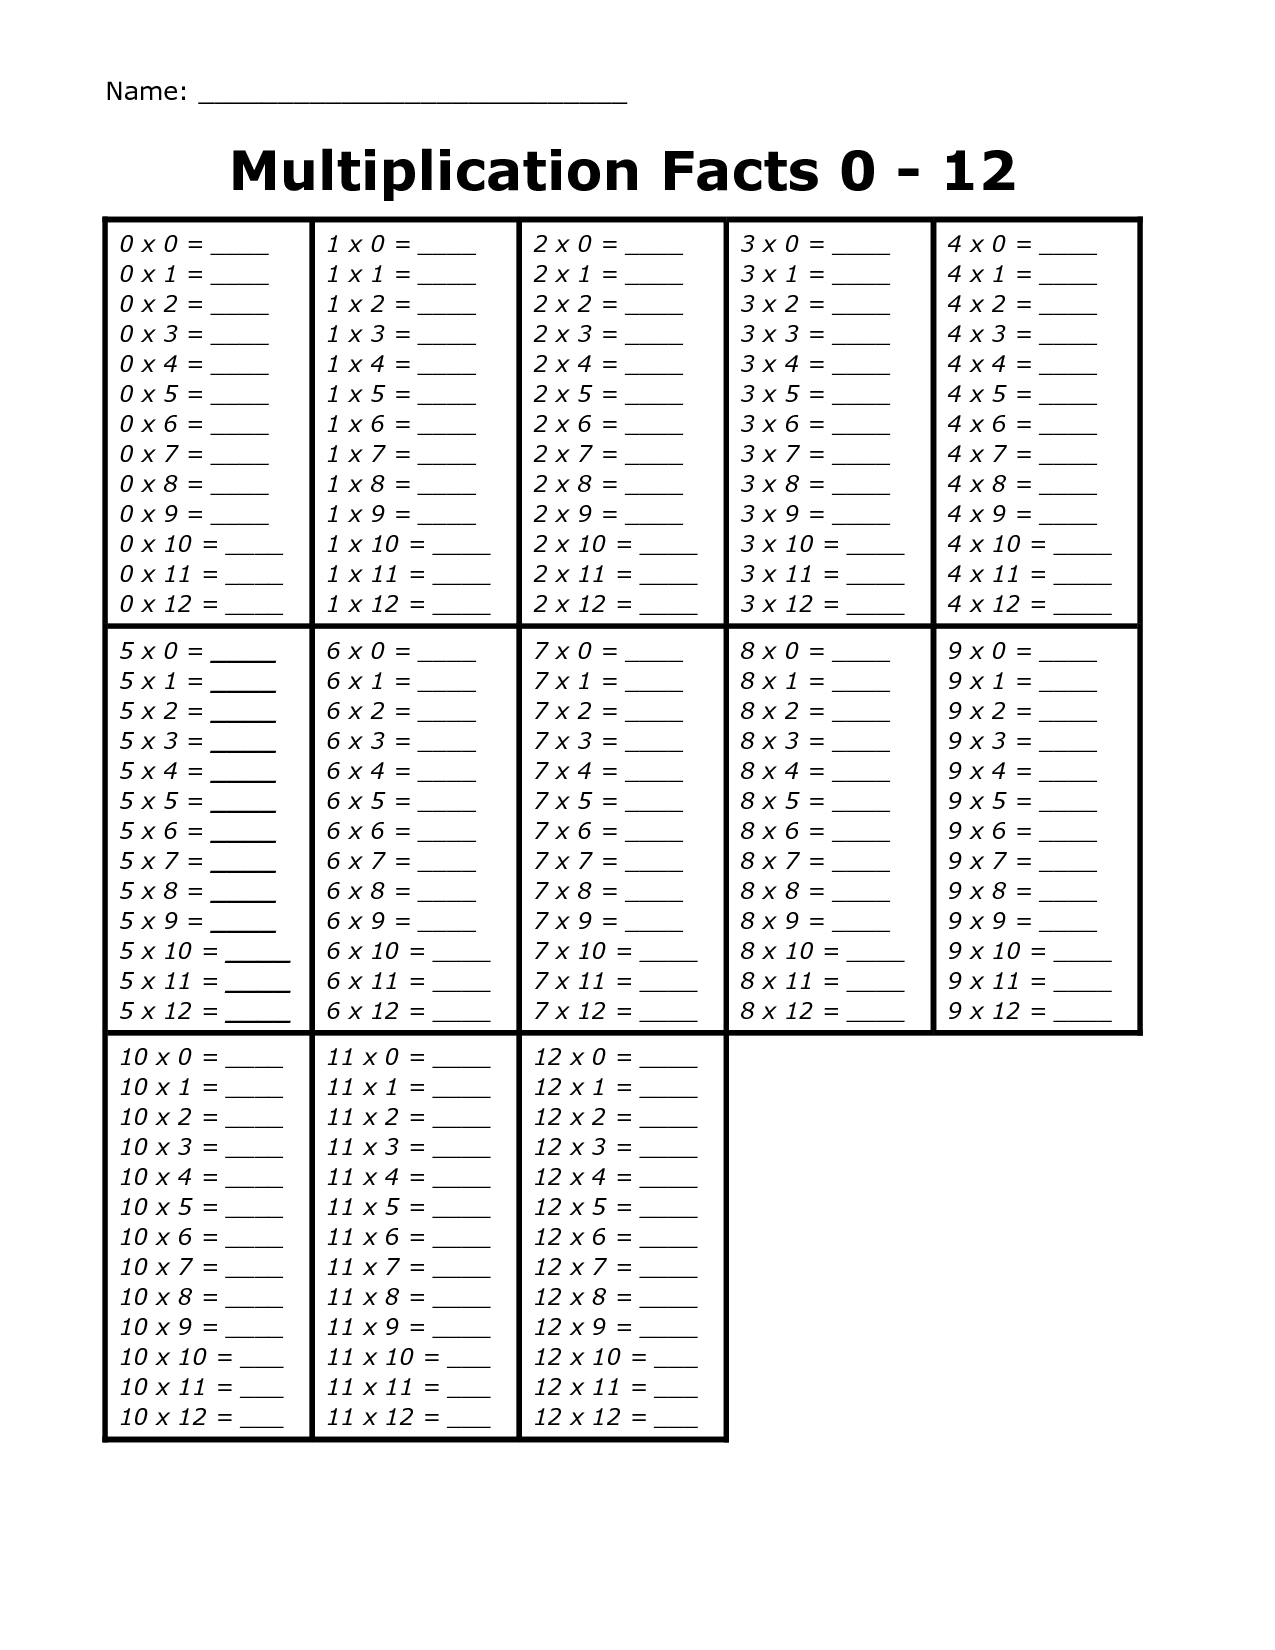 Printable Blank Multiplication Table 0-12 for Printable Multiplication Facts Table